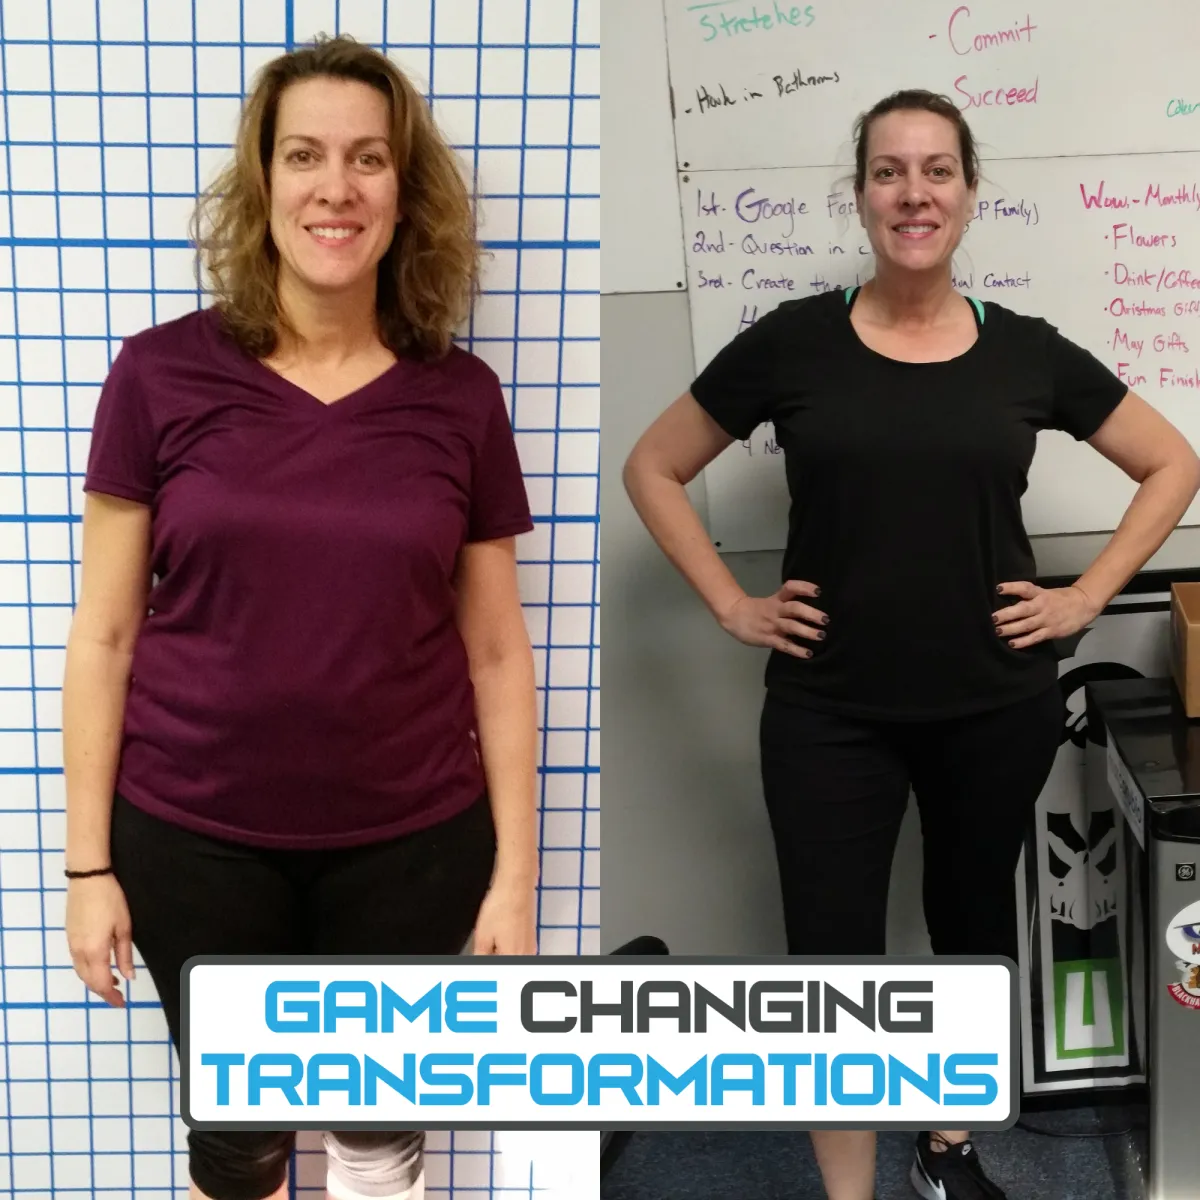 Premier weight loss facility for transformations in Grayslake